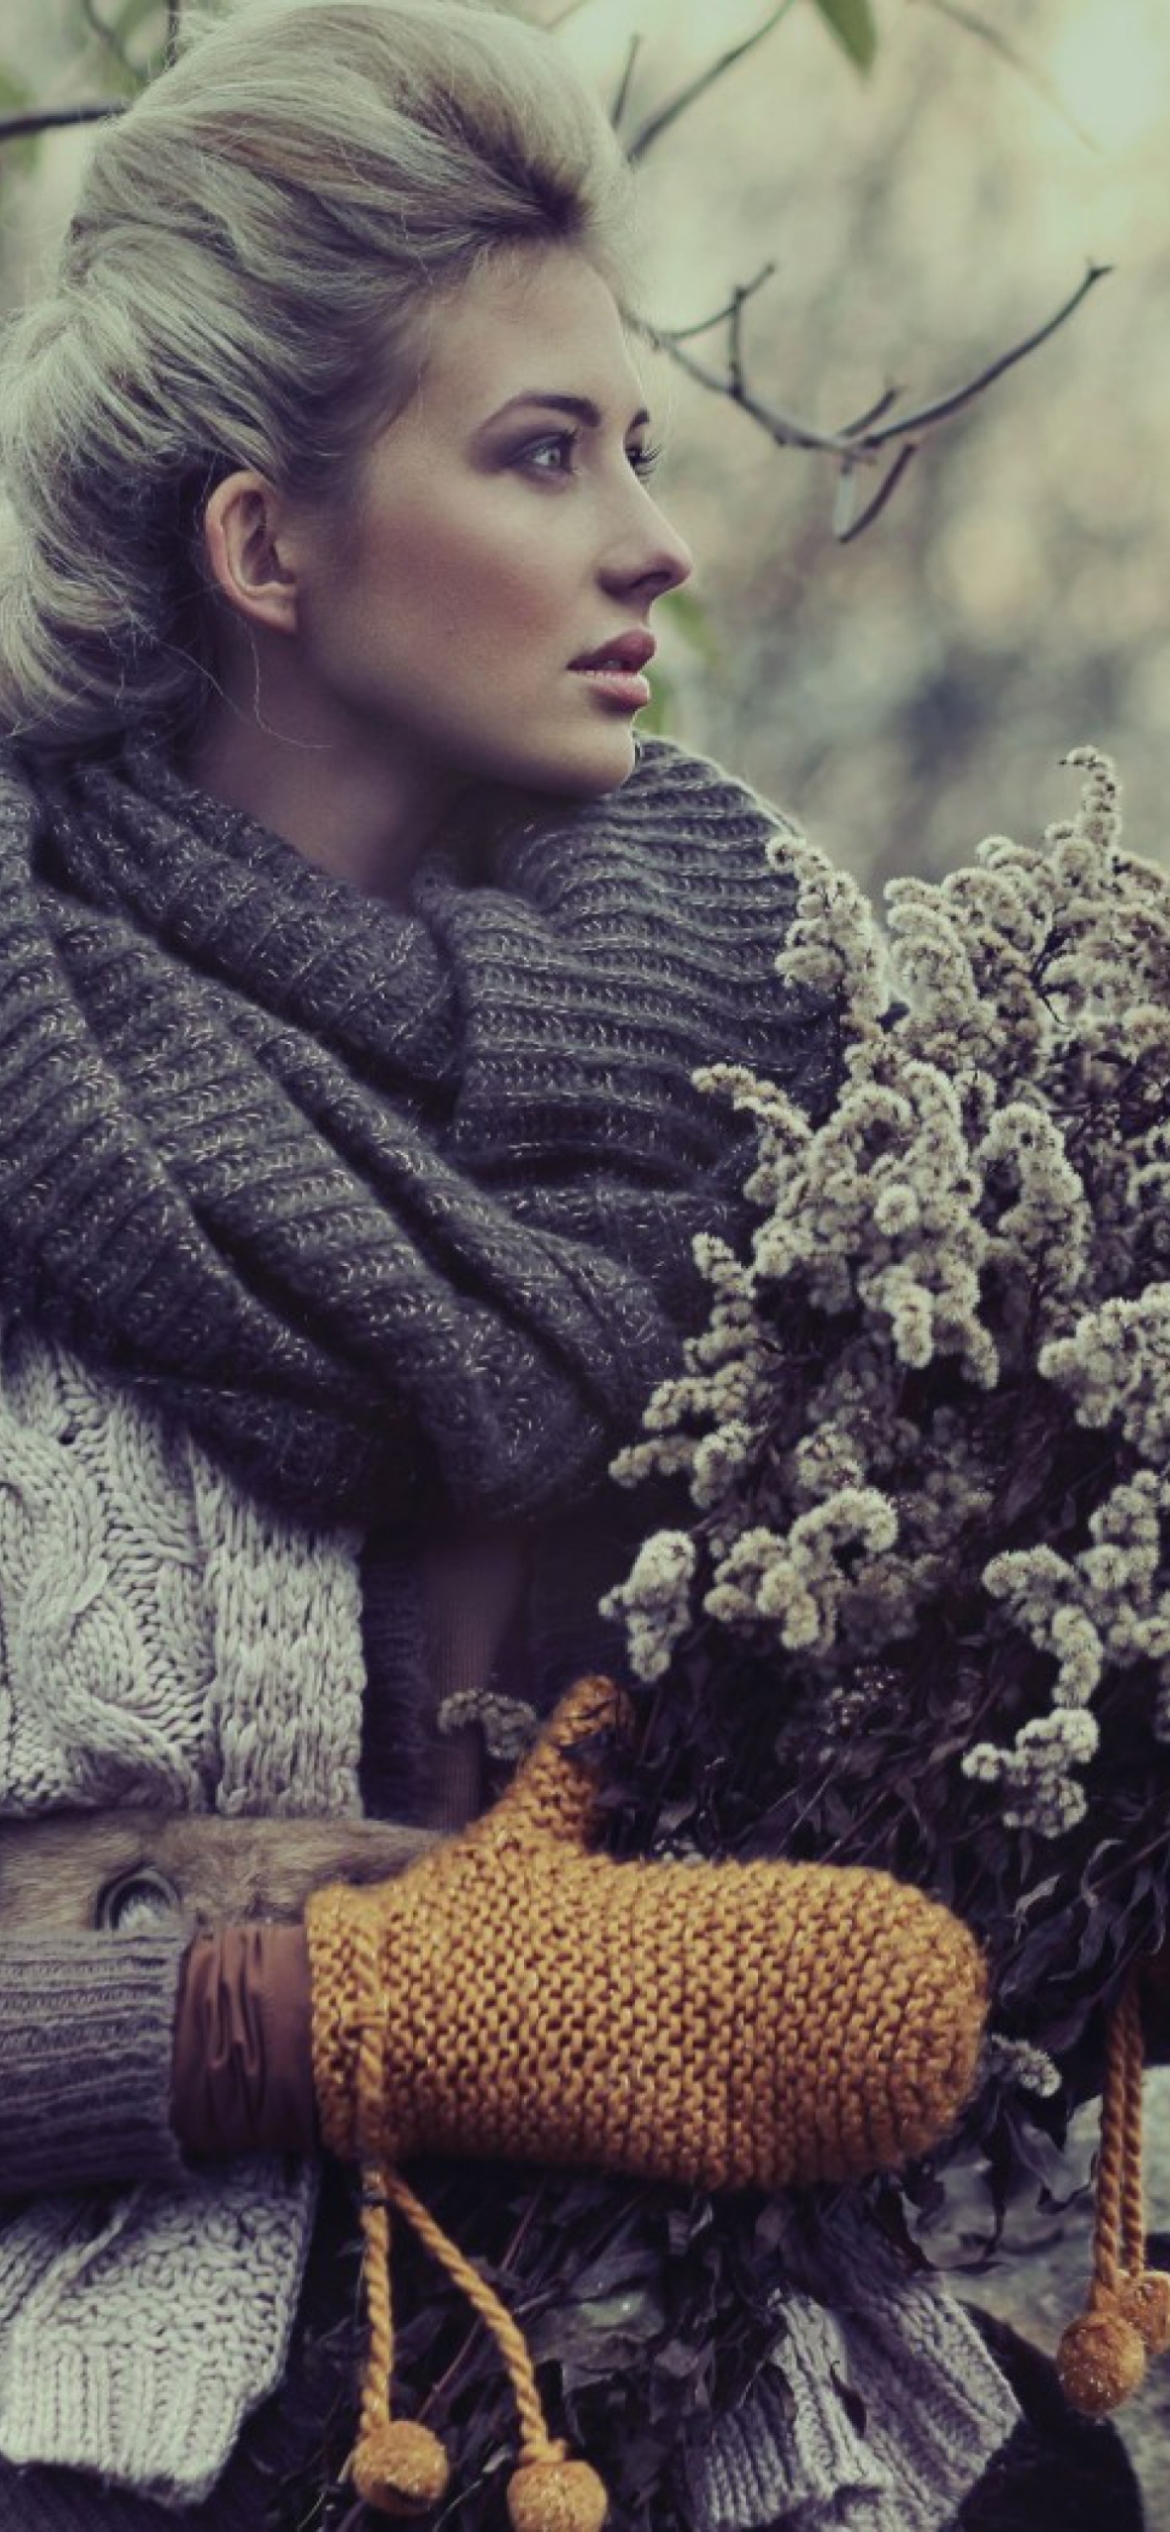 Girl With Winter Flowers Bouquet wallpaper 1170x2532